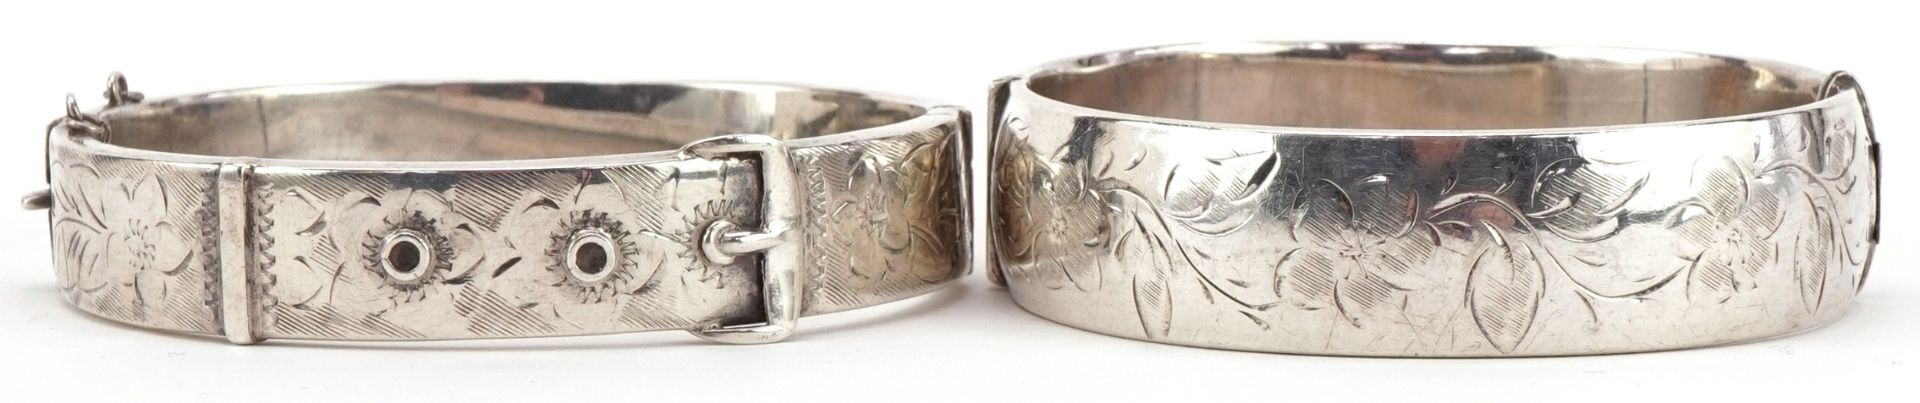 Two Victorian style floral engraved hinged bangles, one in the form of a buckle, each 6.5cm wide,